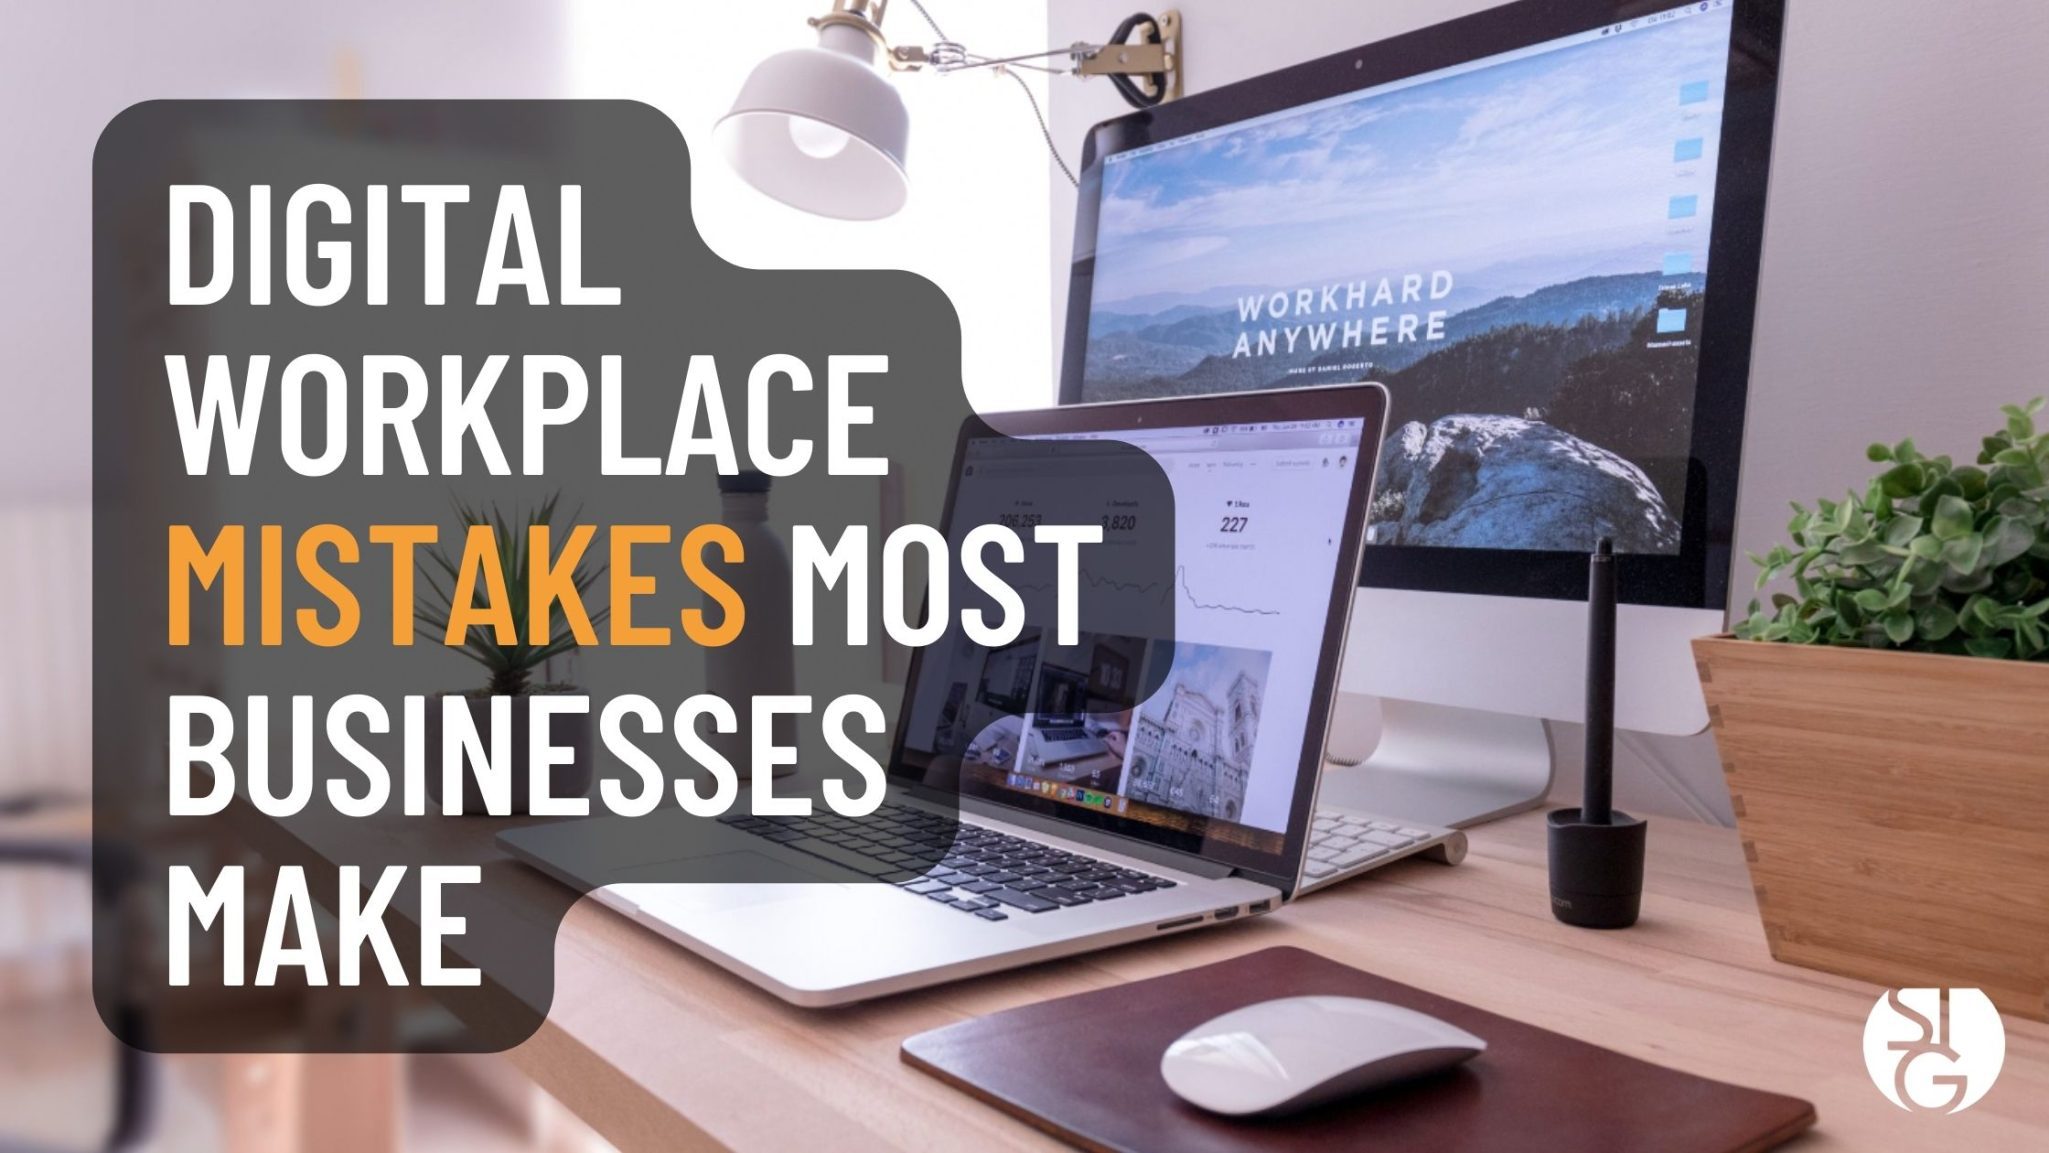 Digital Workplace Mistakes Most Businesses Make